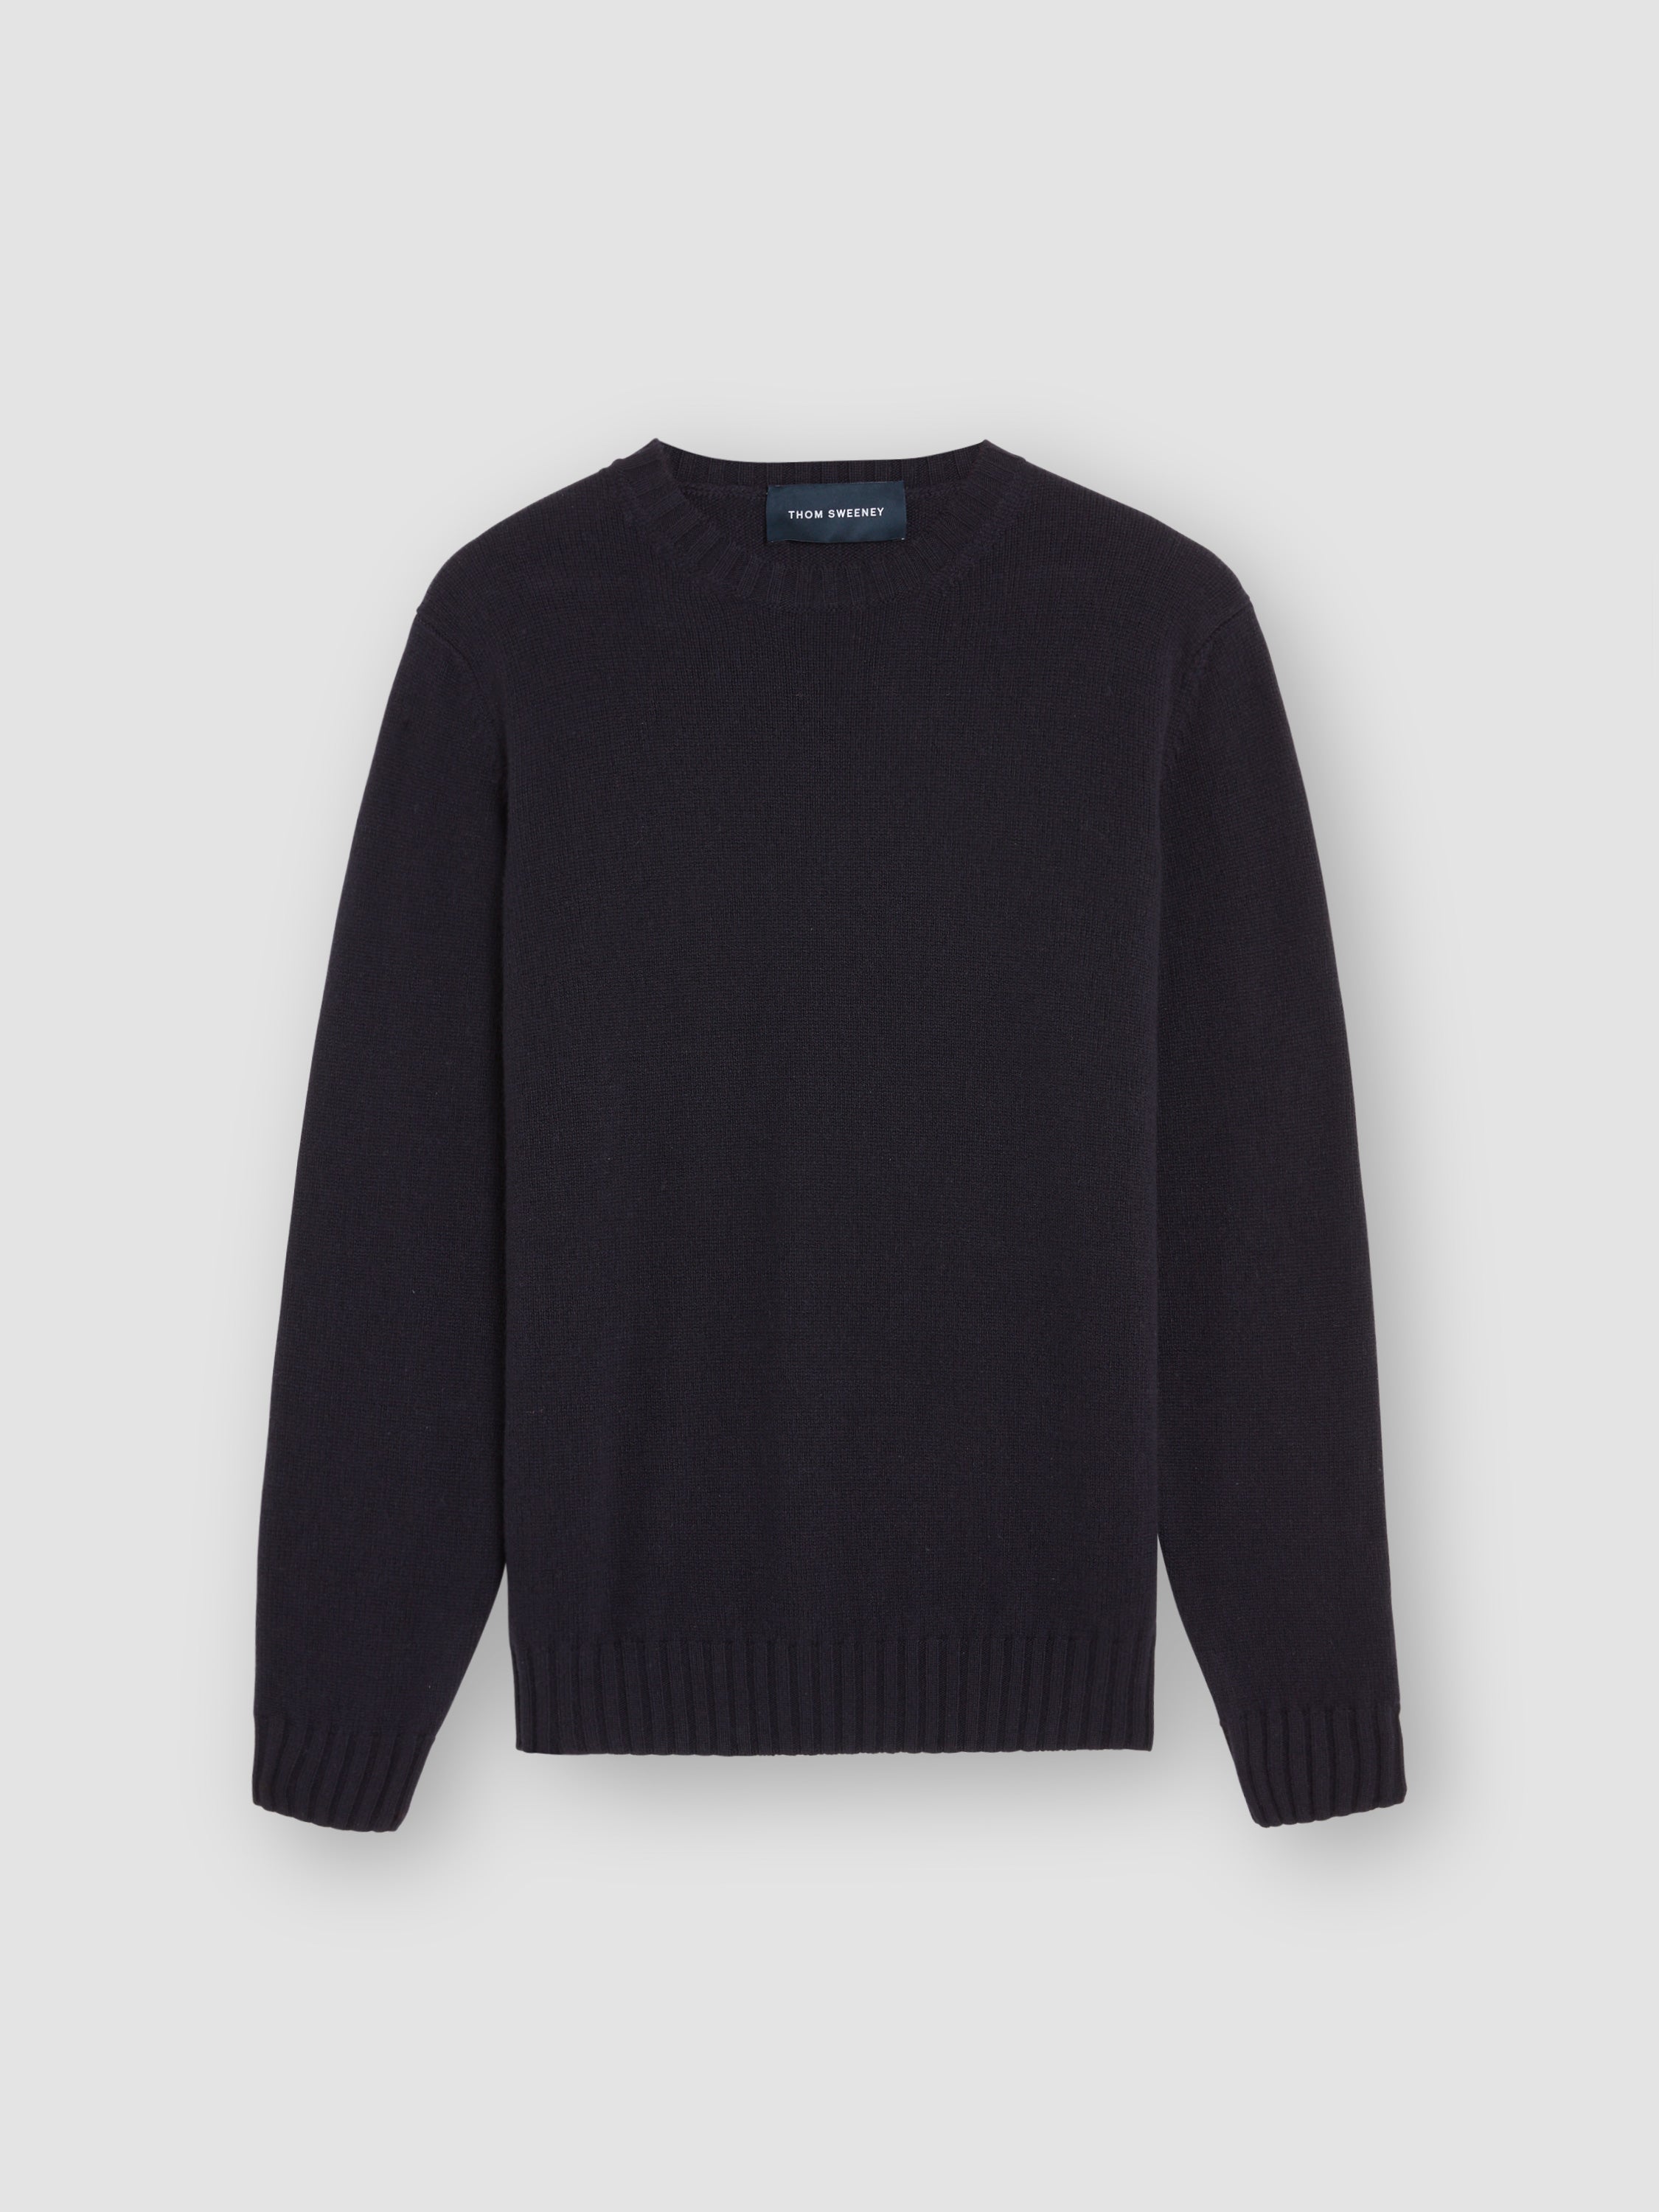 Cashmere Crew Neck Sweater Navy Product Image